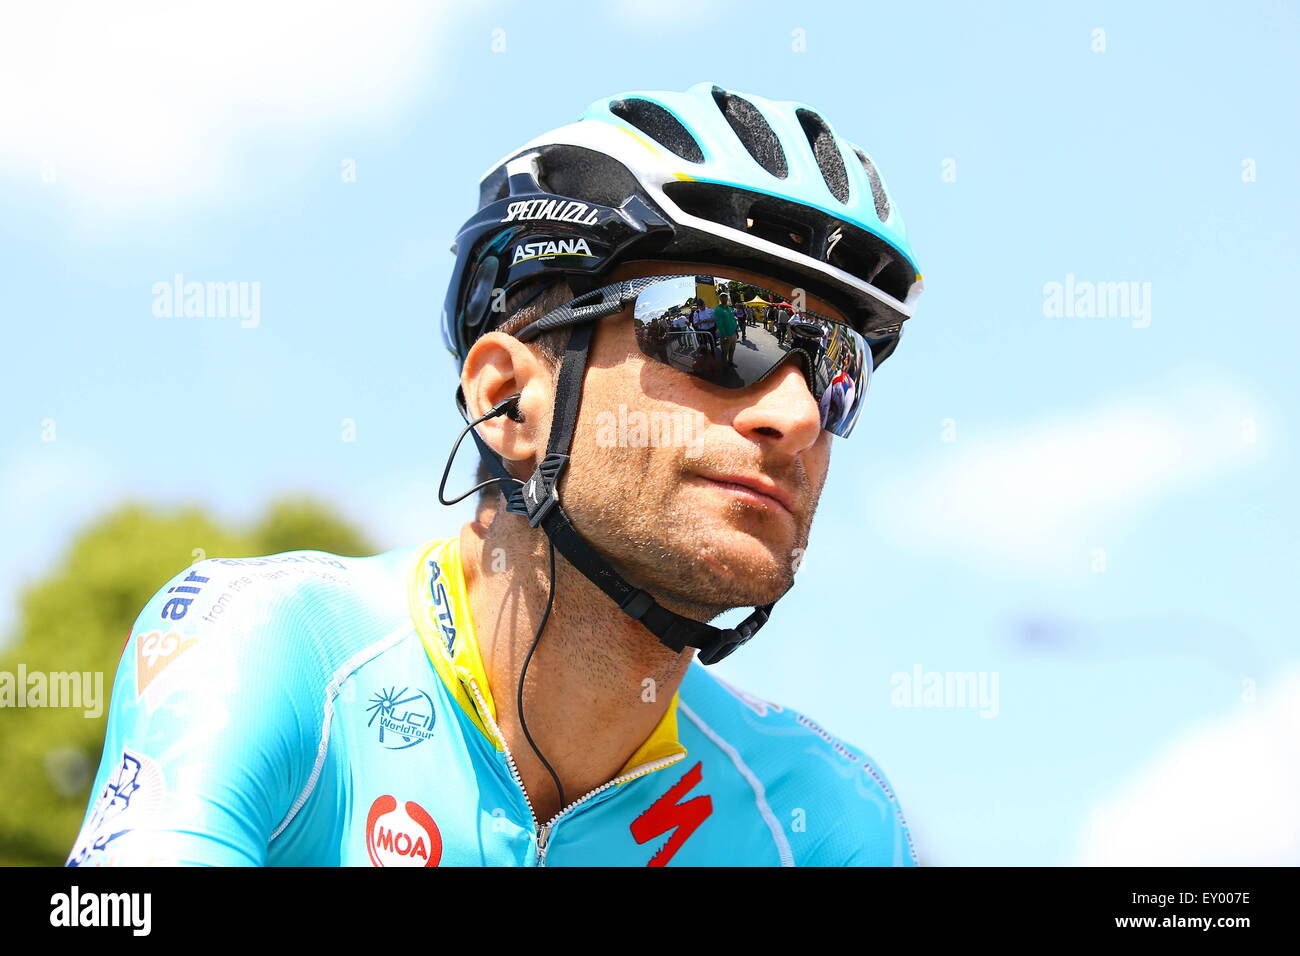 Astana Pro Team High Resolution Stock Photography and Images - Alamy